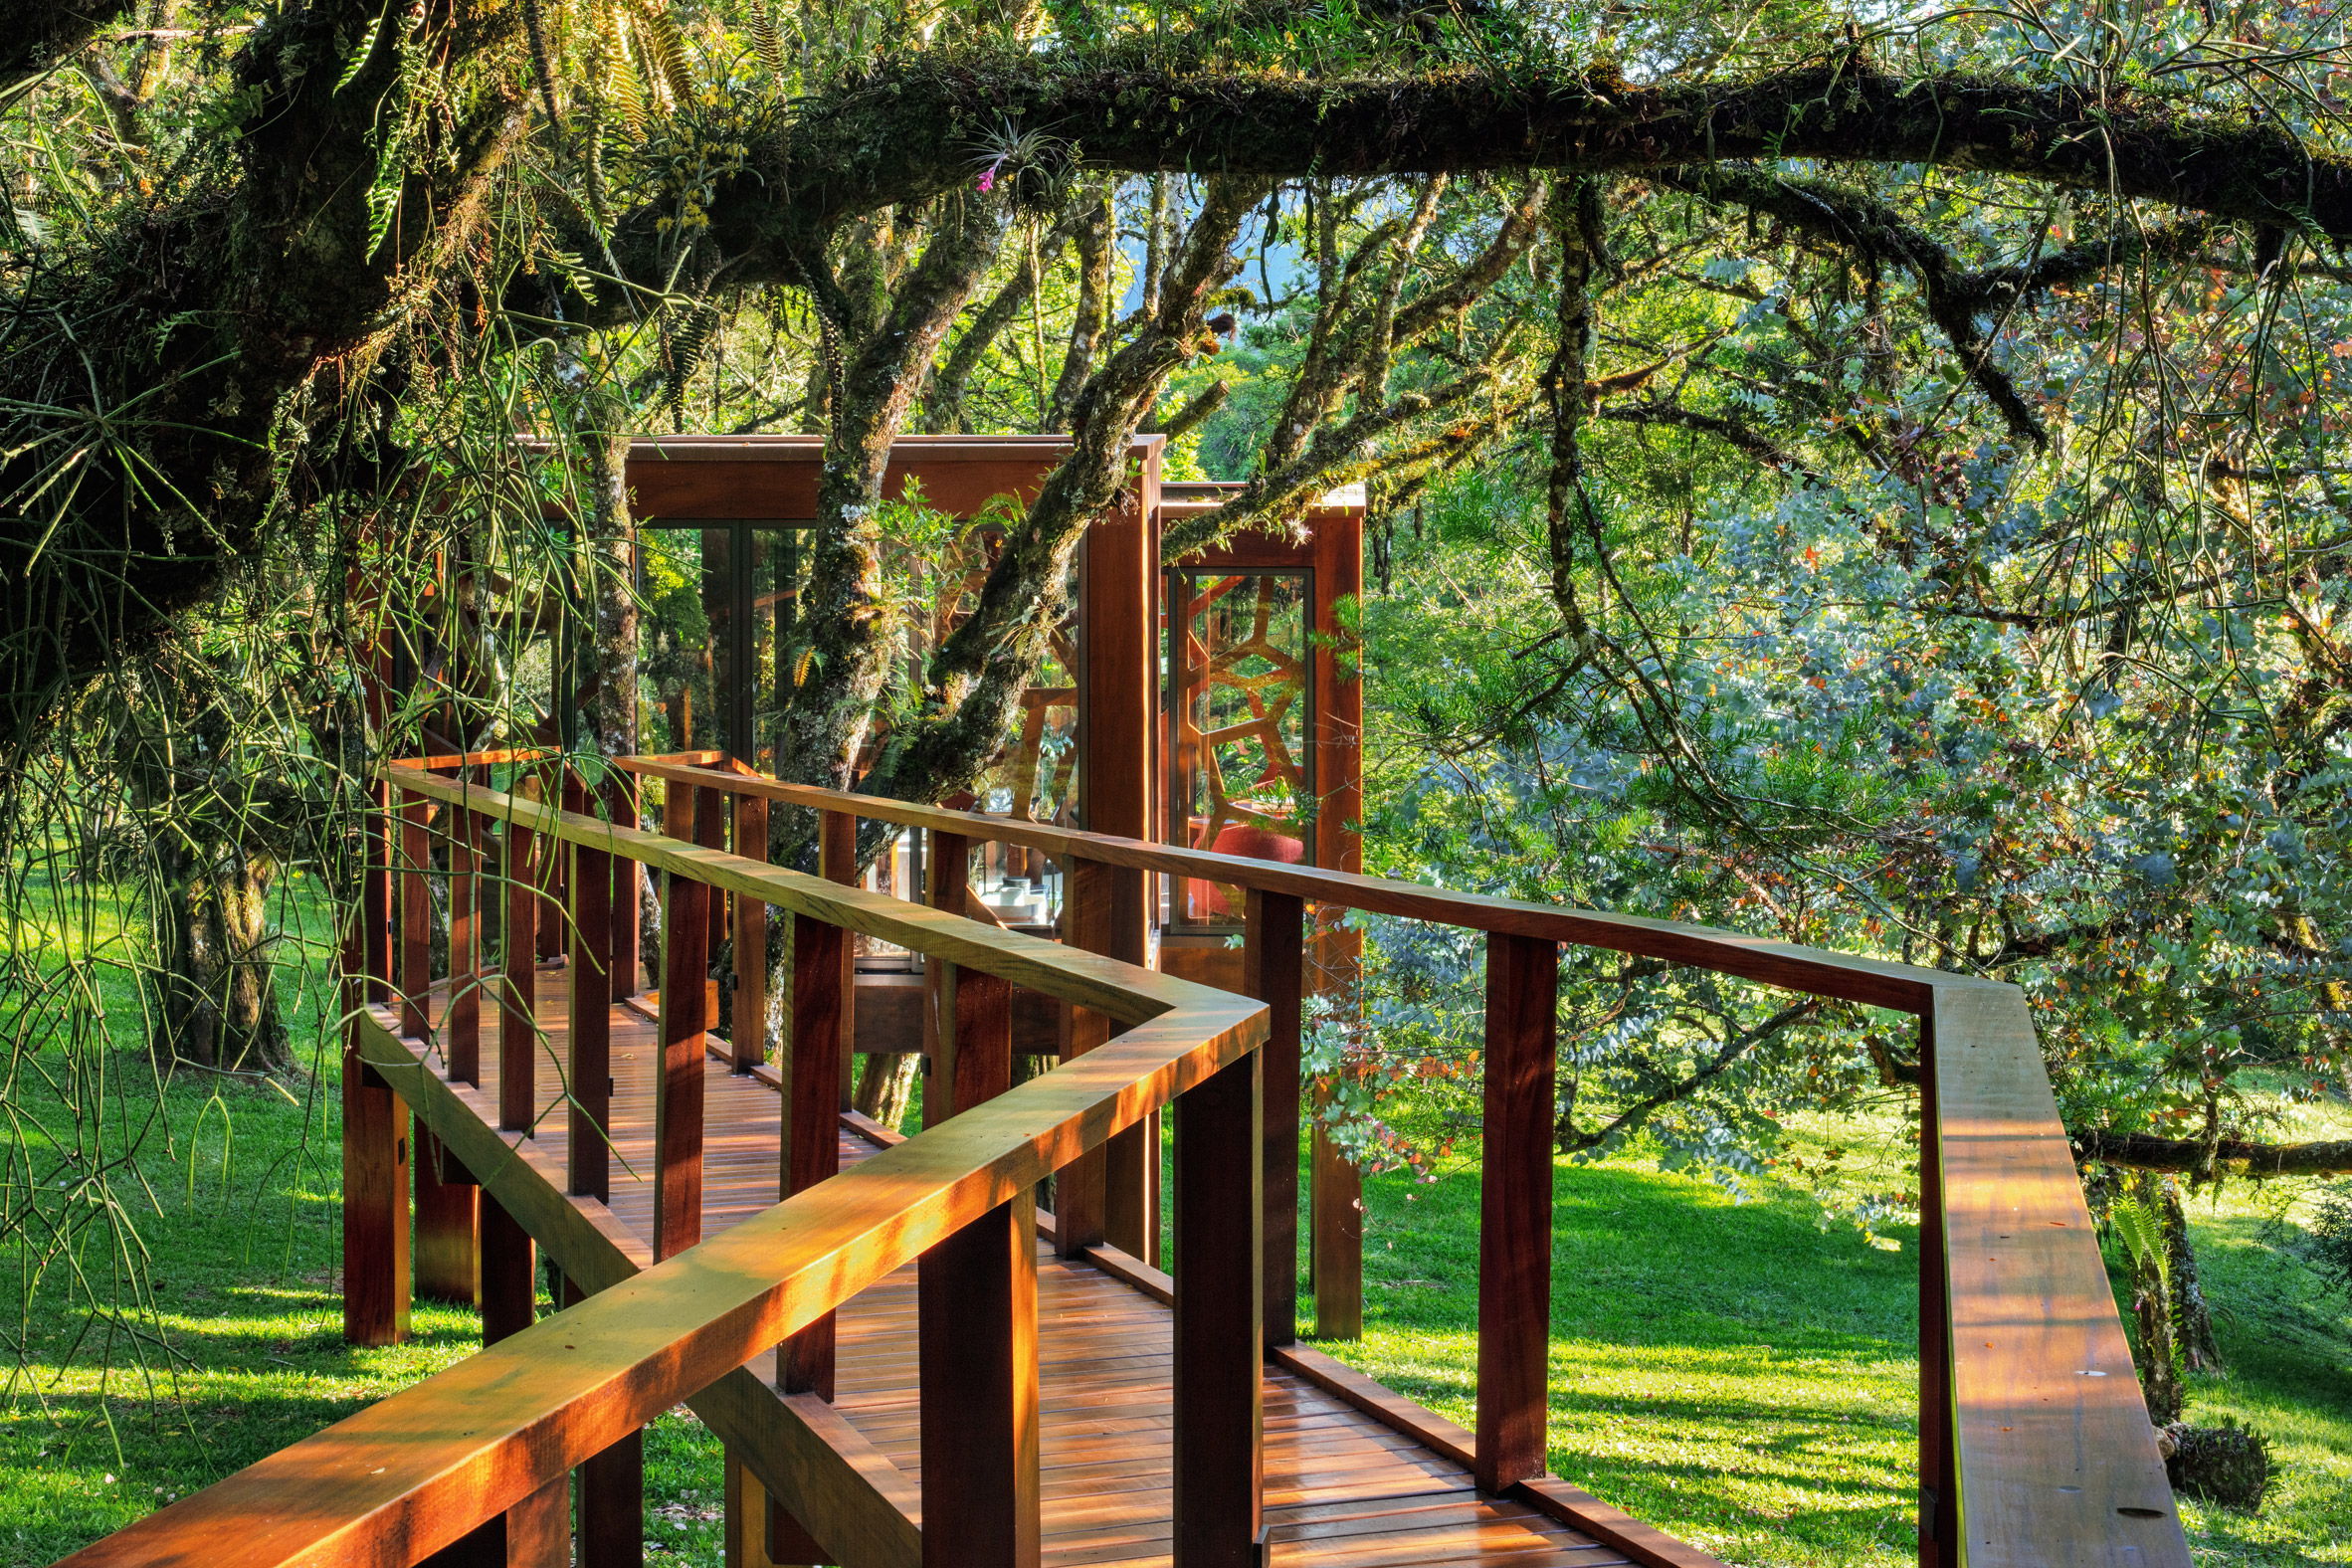 Elevated timber walkway connecting two treehouses in Brazil